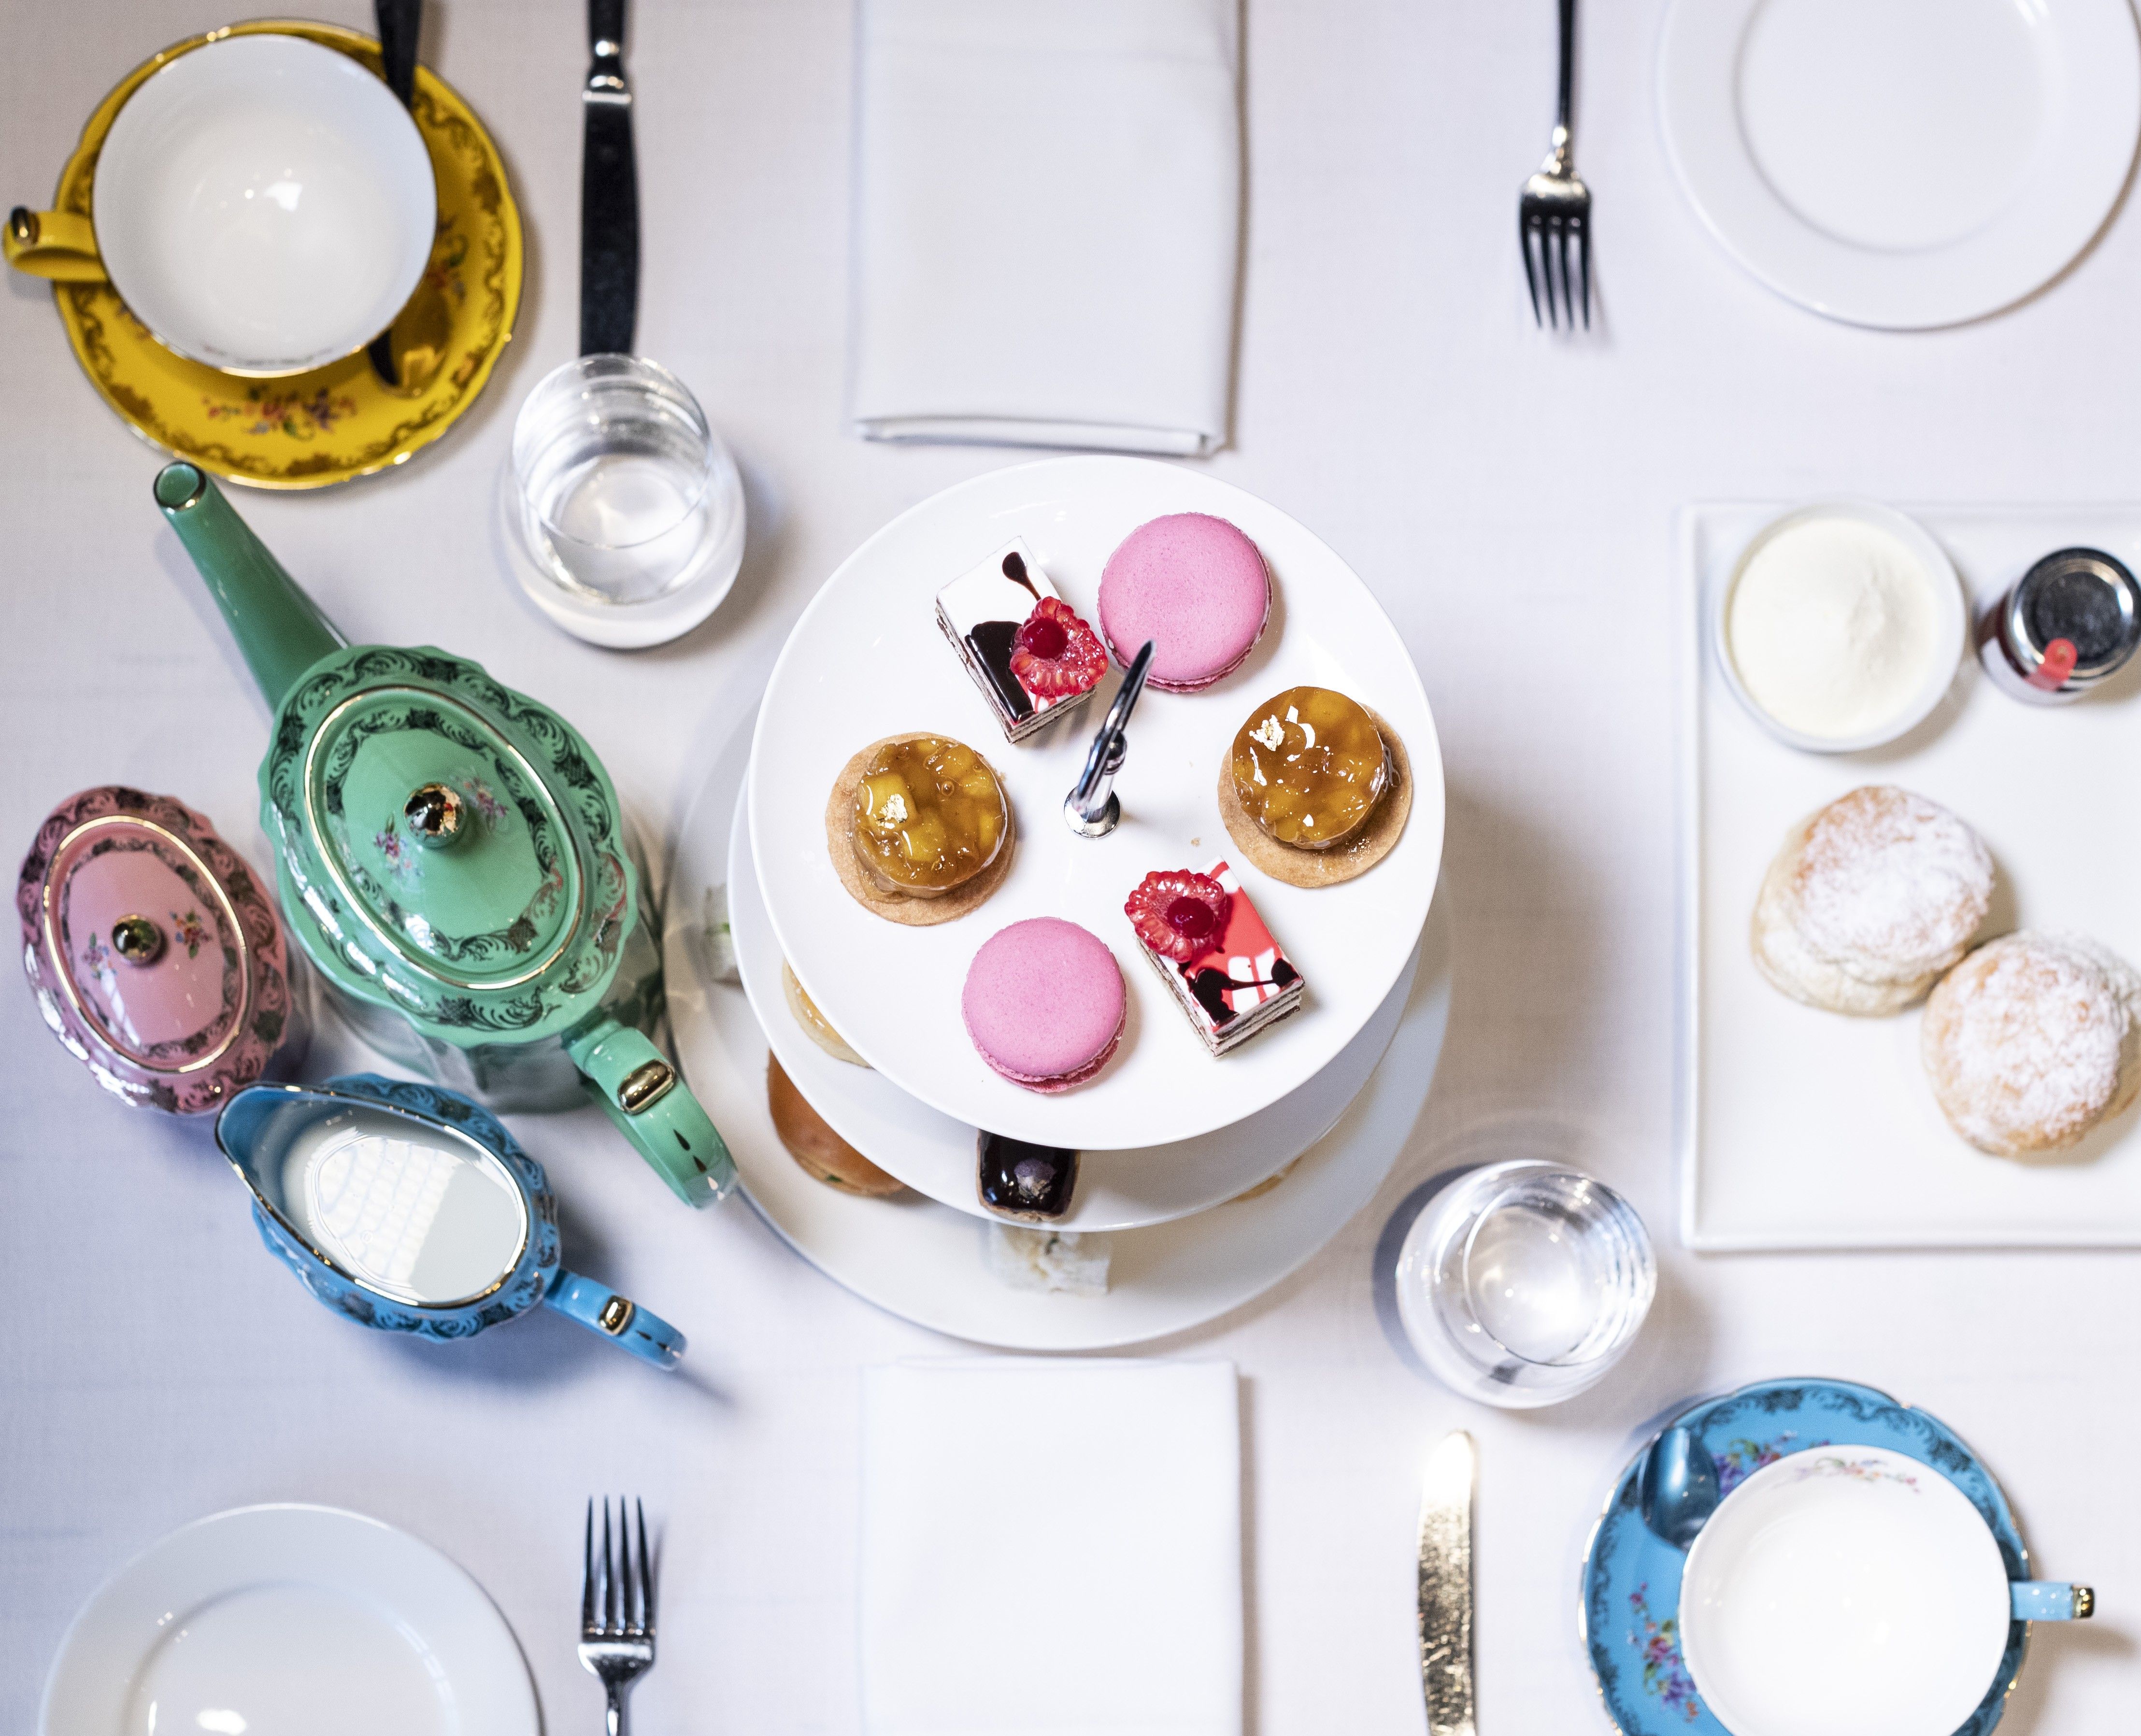 Meringues, Macarons and Monet at the National Gallery of Australia